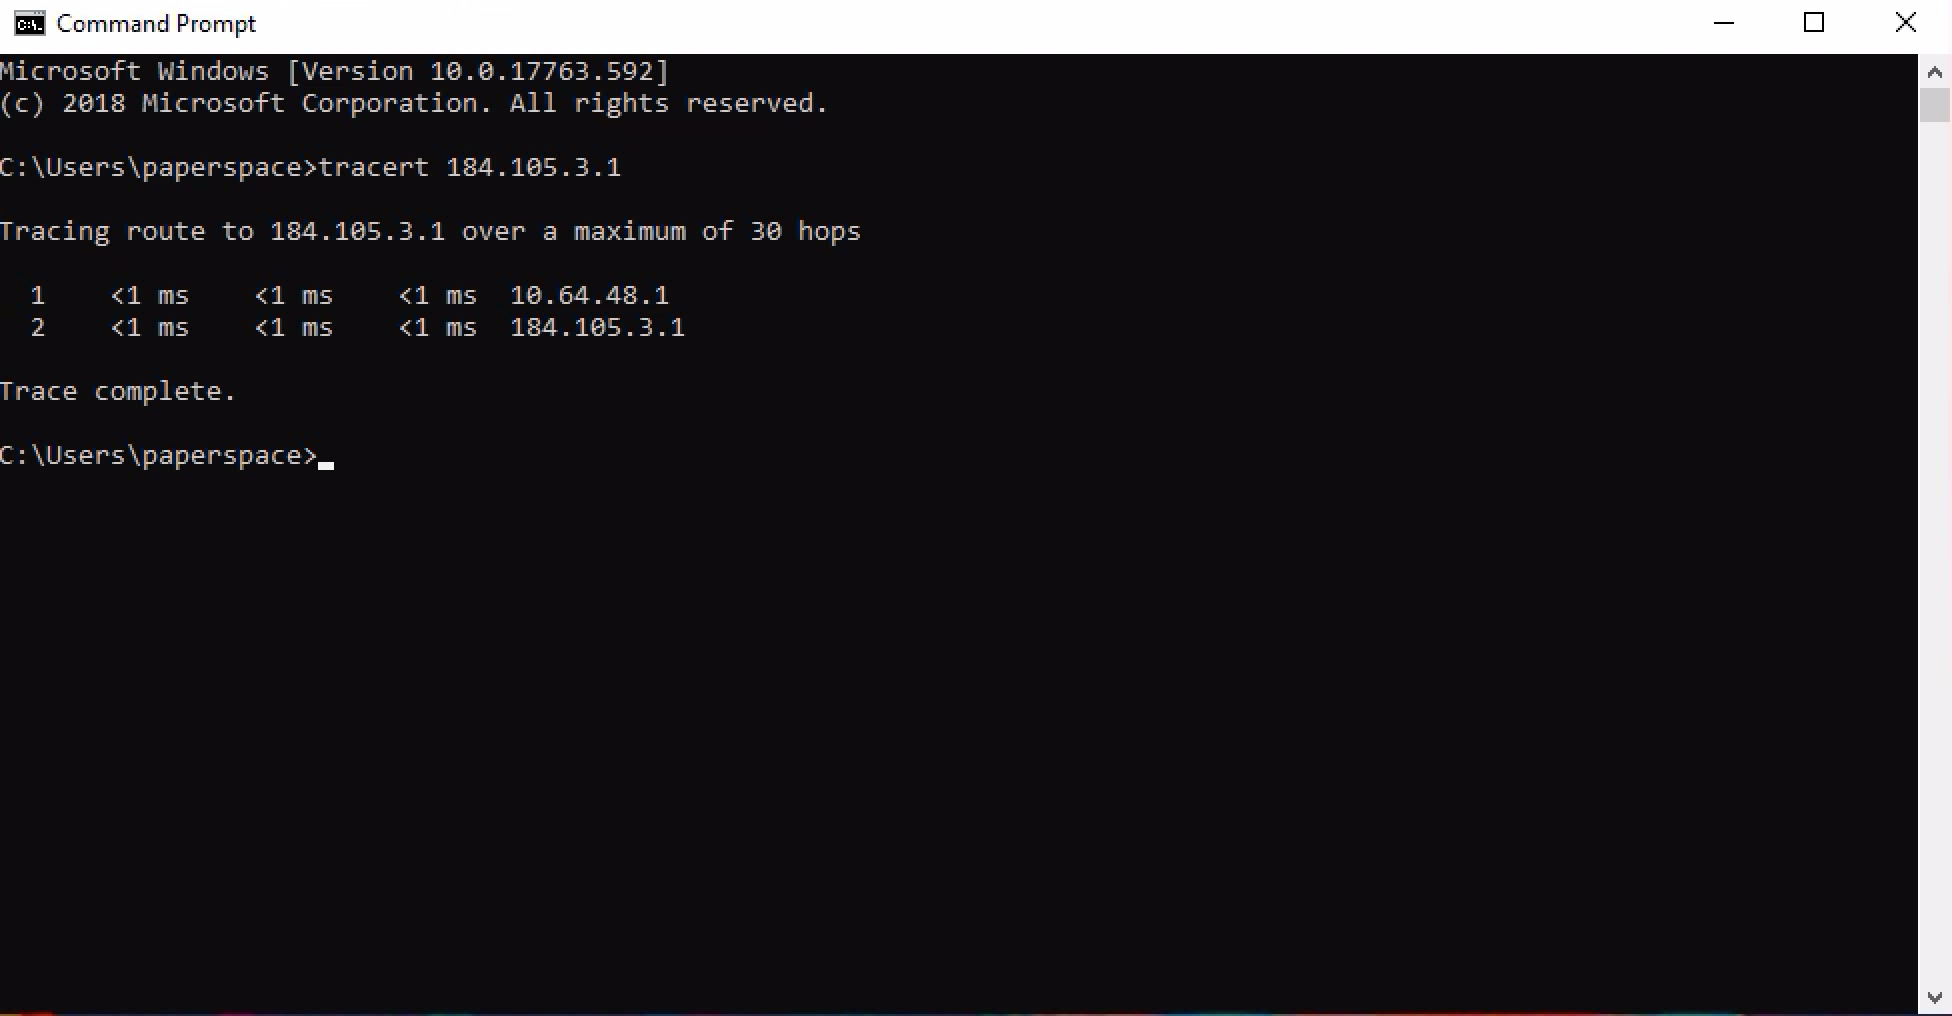 Test latency traceroute